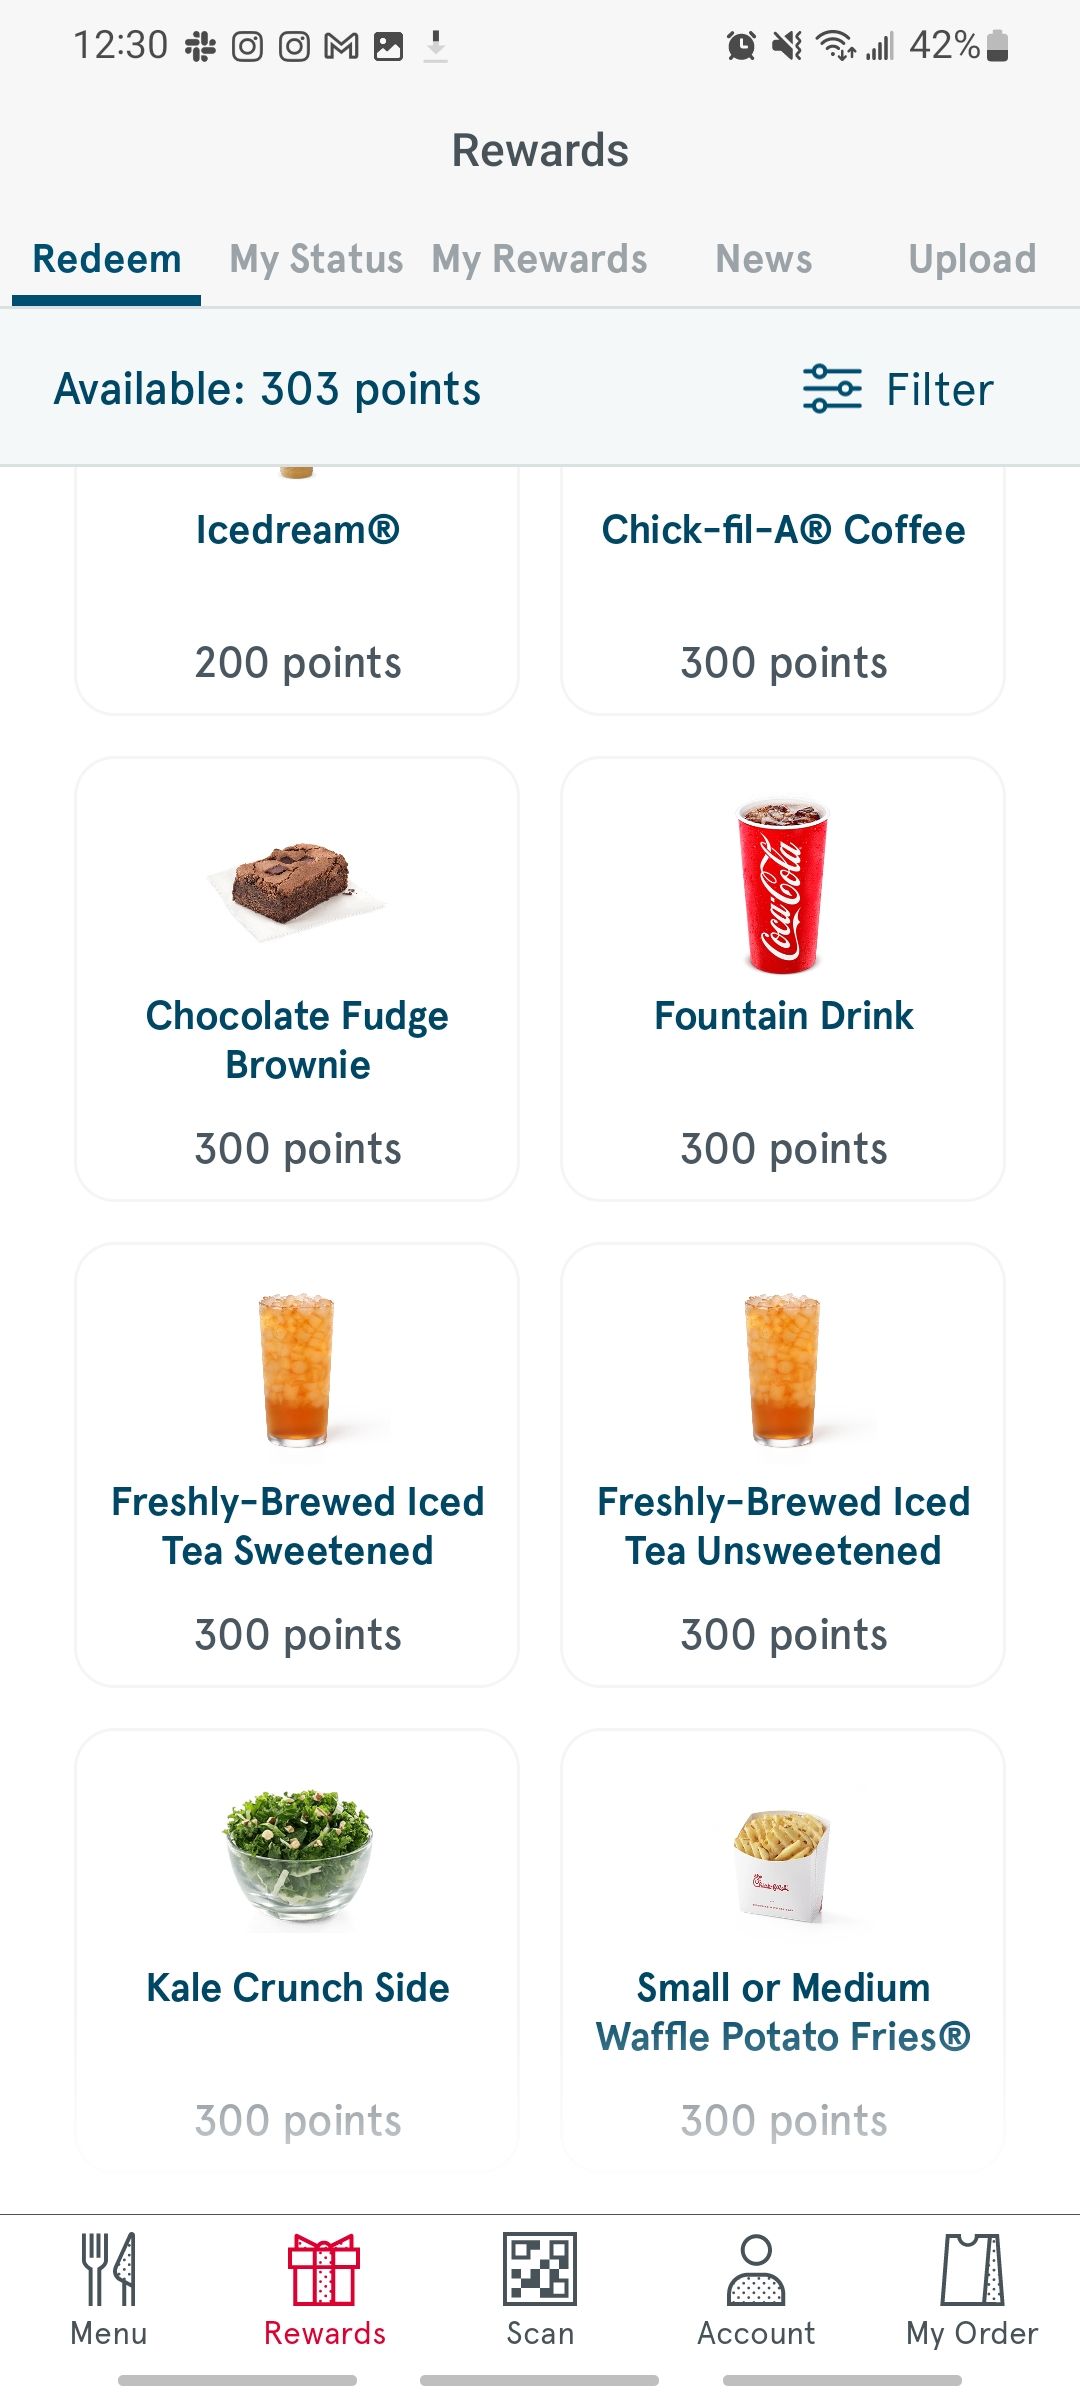 examples of chikfila rewards you can redeem with points